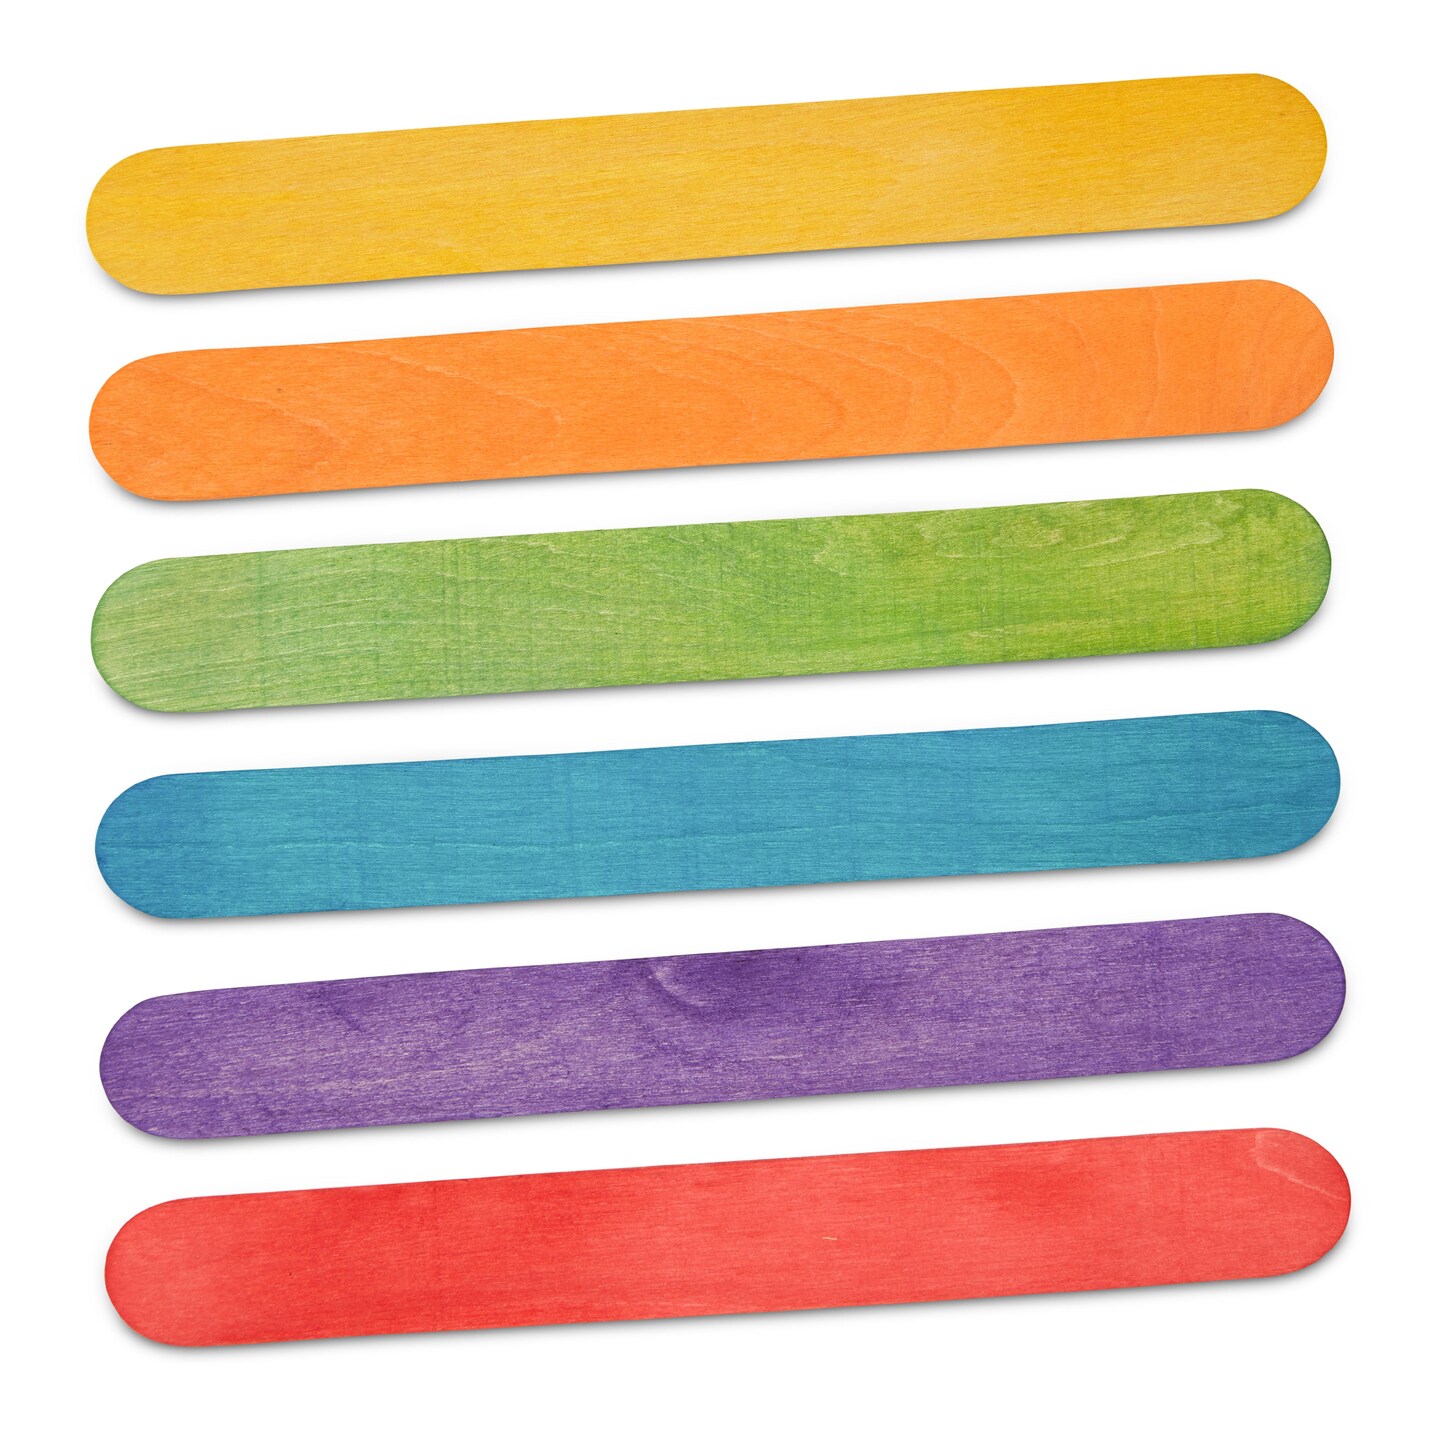 Colored Popsicle Sticks for Crafts, 6 inches Long x 3/4 inch Wide, Woodpeckers